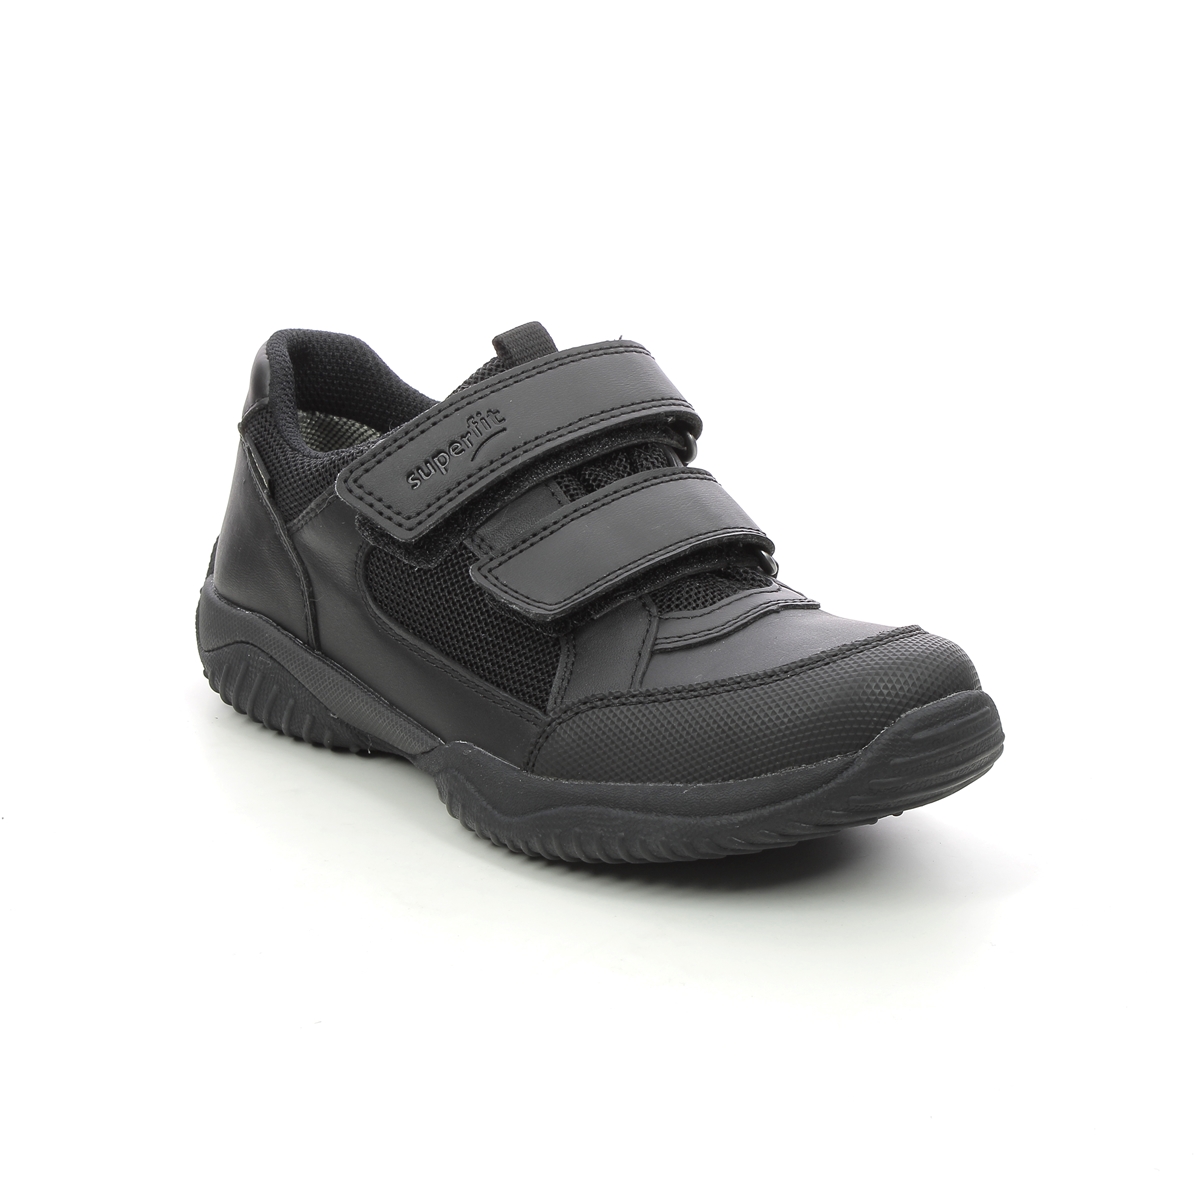 Superfit Storm Shoe Gtx Black Leather Kids Boys Casual Shoes 1009382-0000 In Size 30 In Plain Black Leather For kids